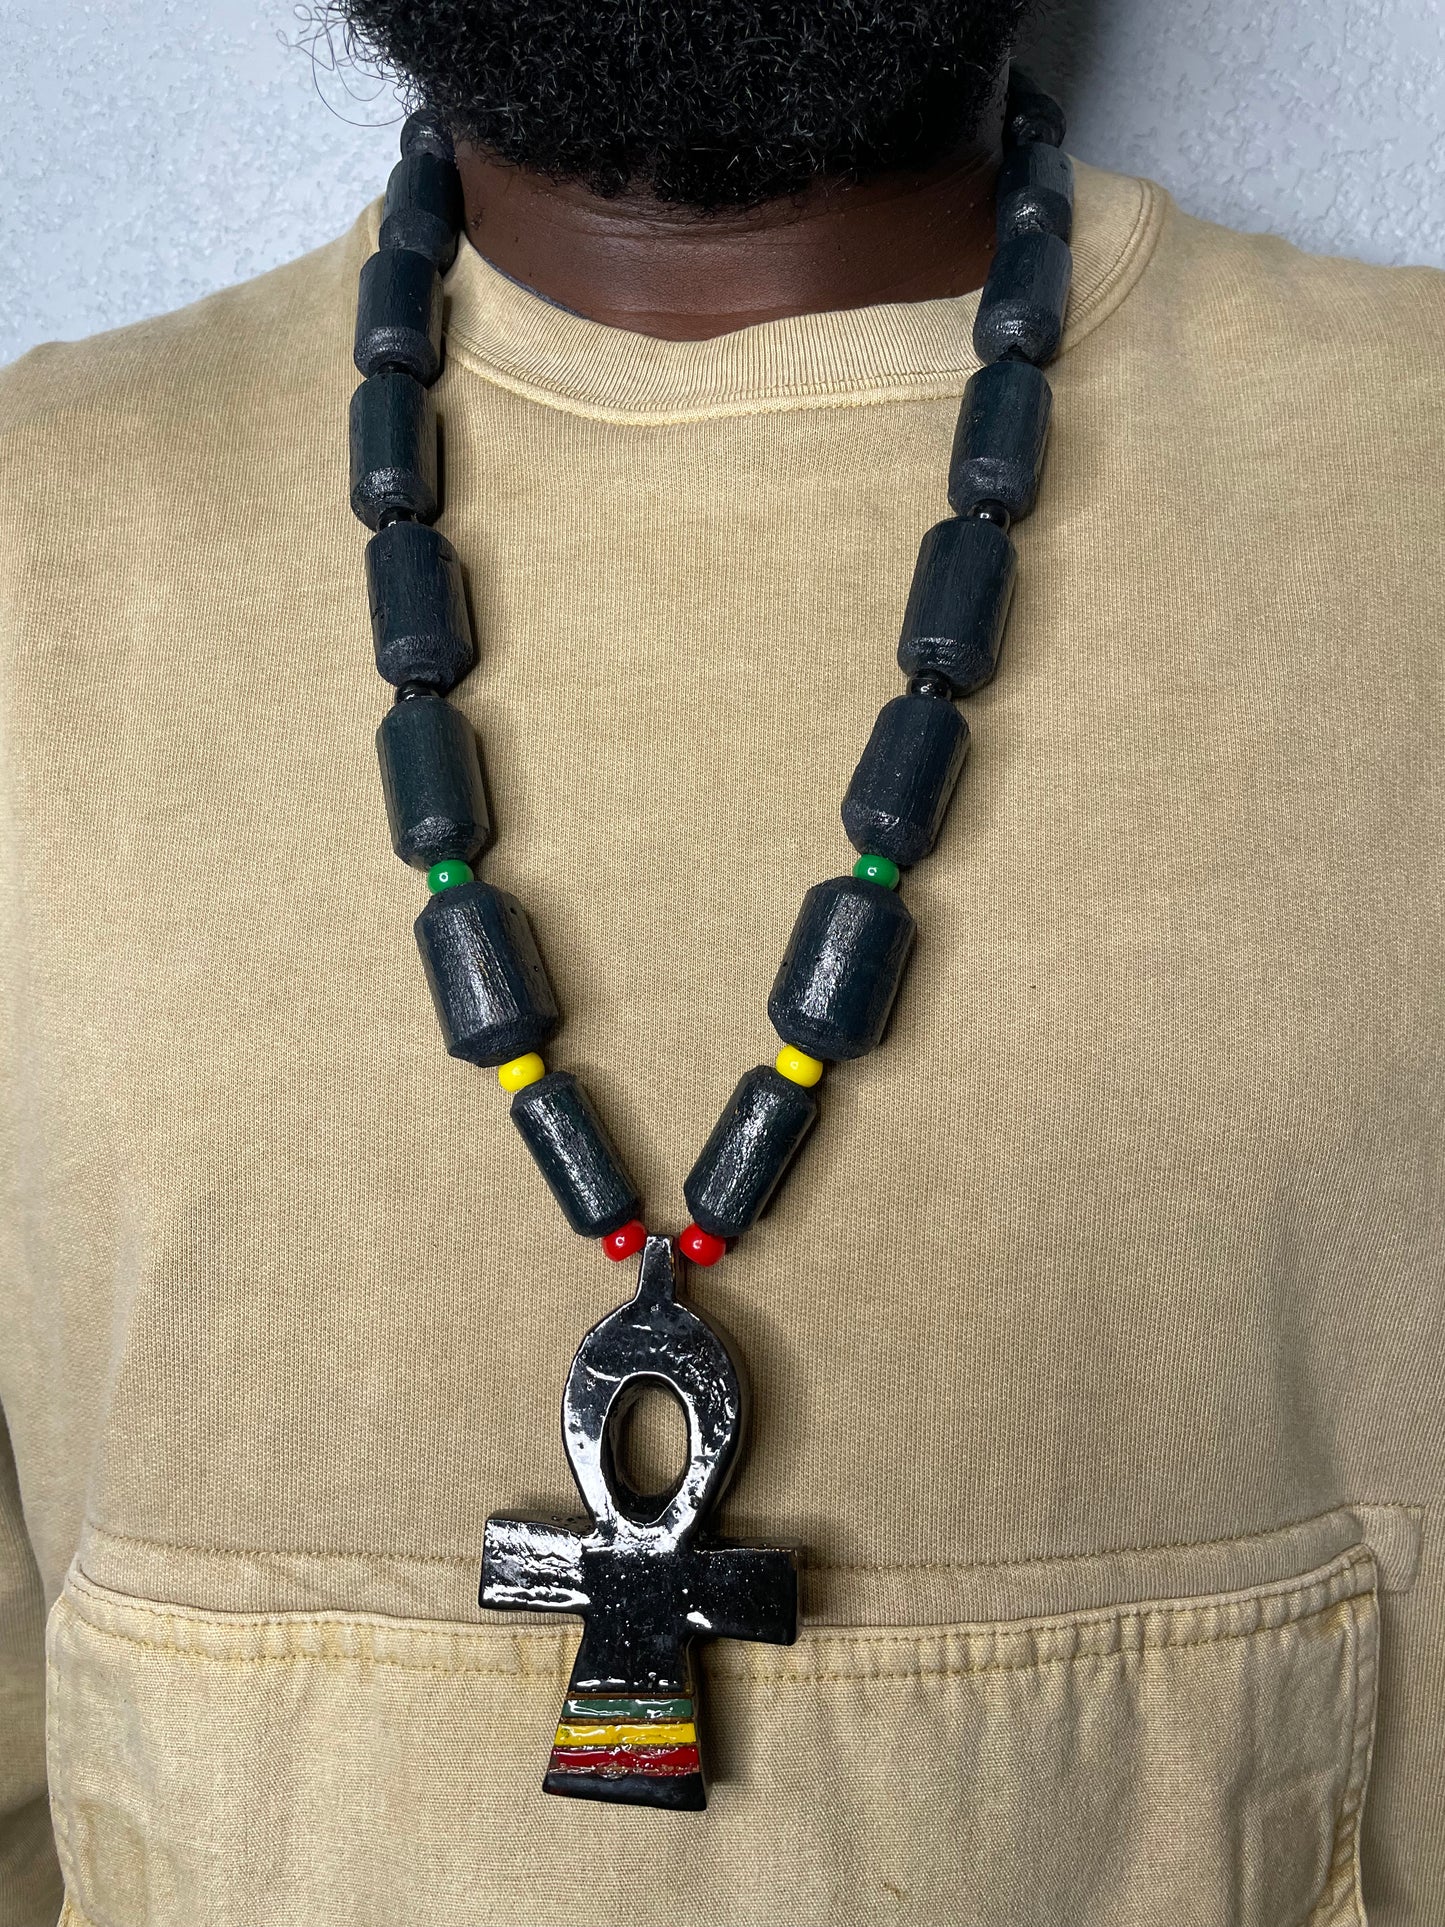 Handcrafted EGYPTIAN ANKH Key of Life Pendant Wood Bead Necklace